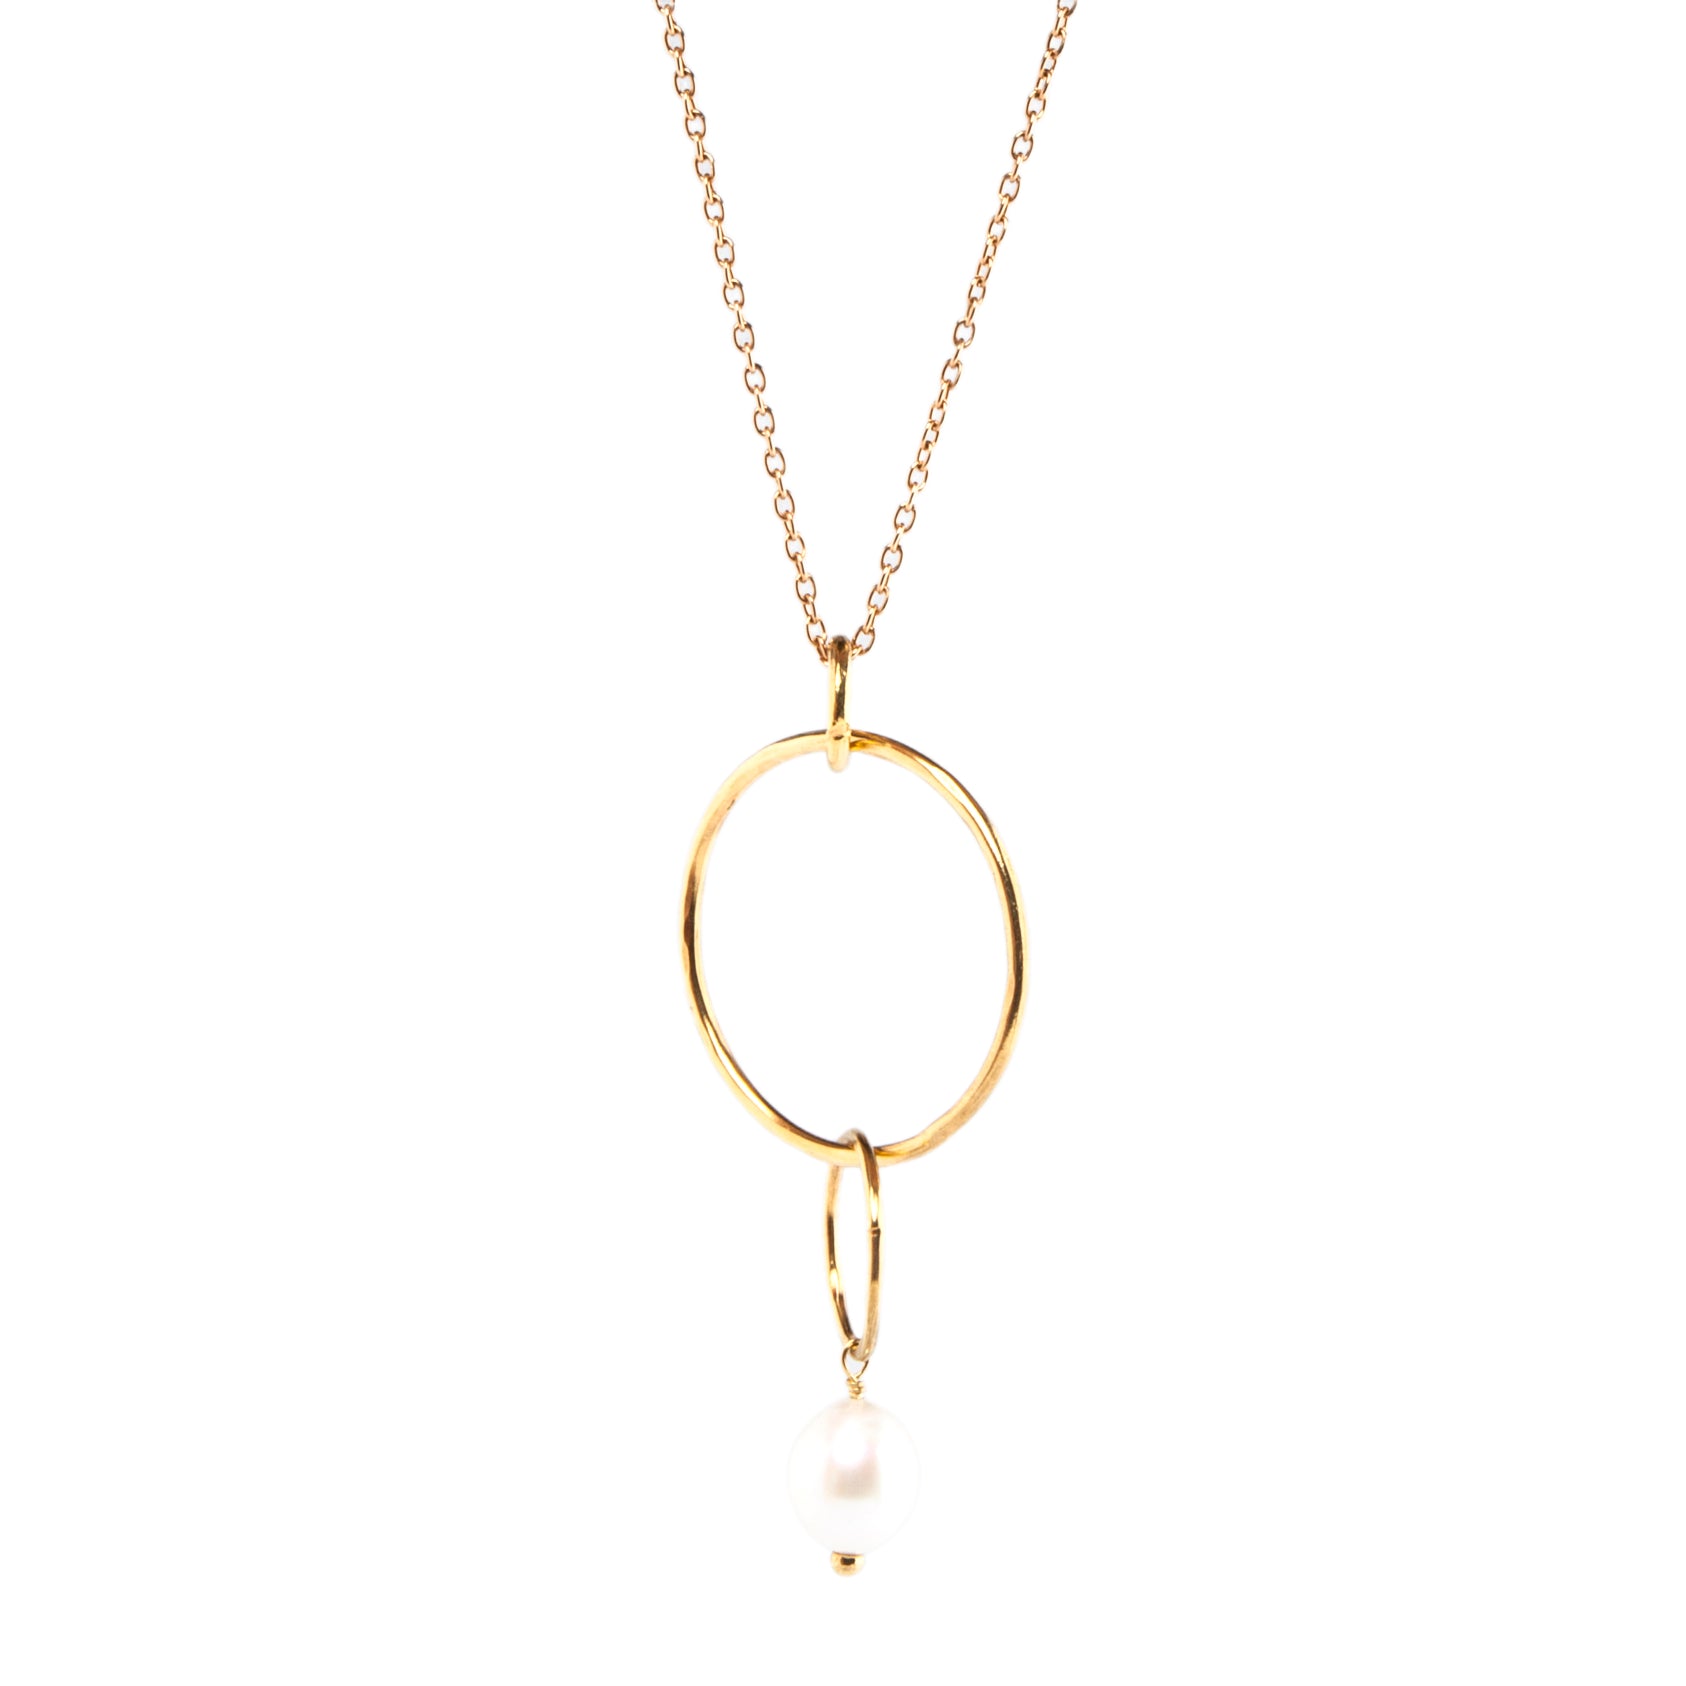 Freshwater Pearl Gold Pendant Necklace - Fairmile